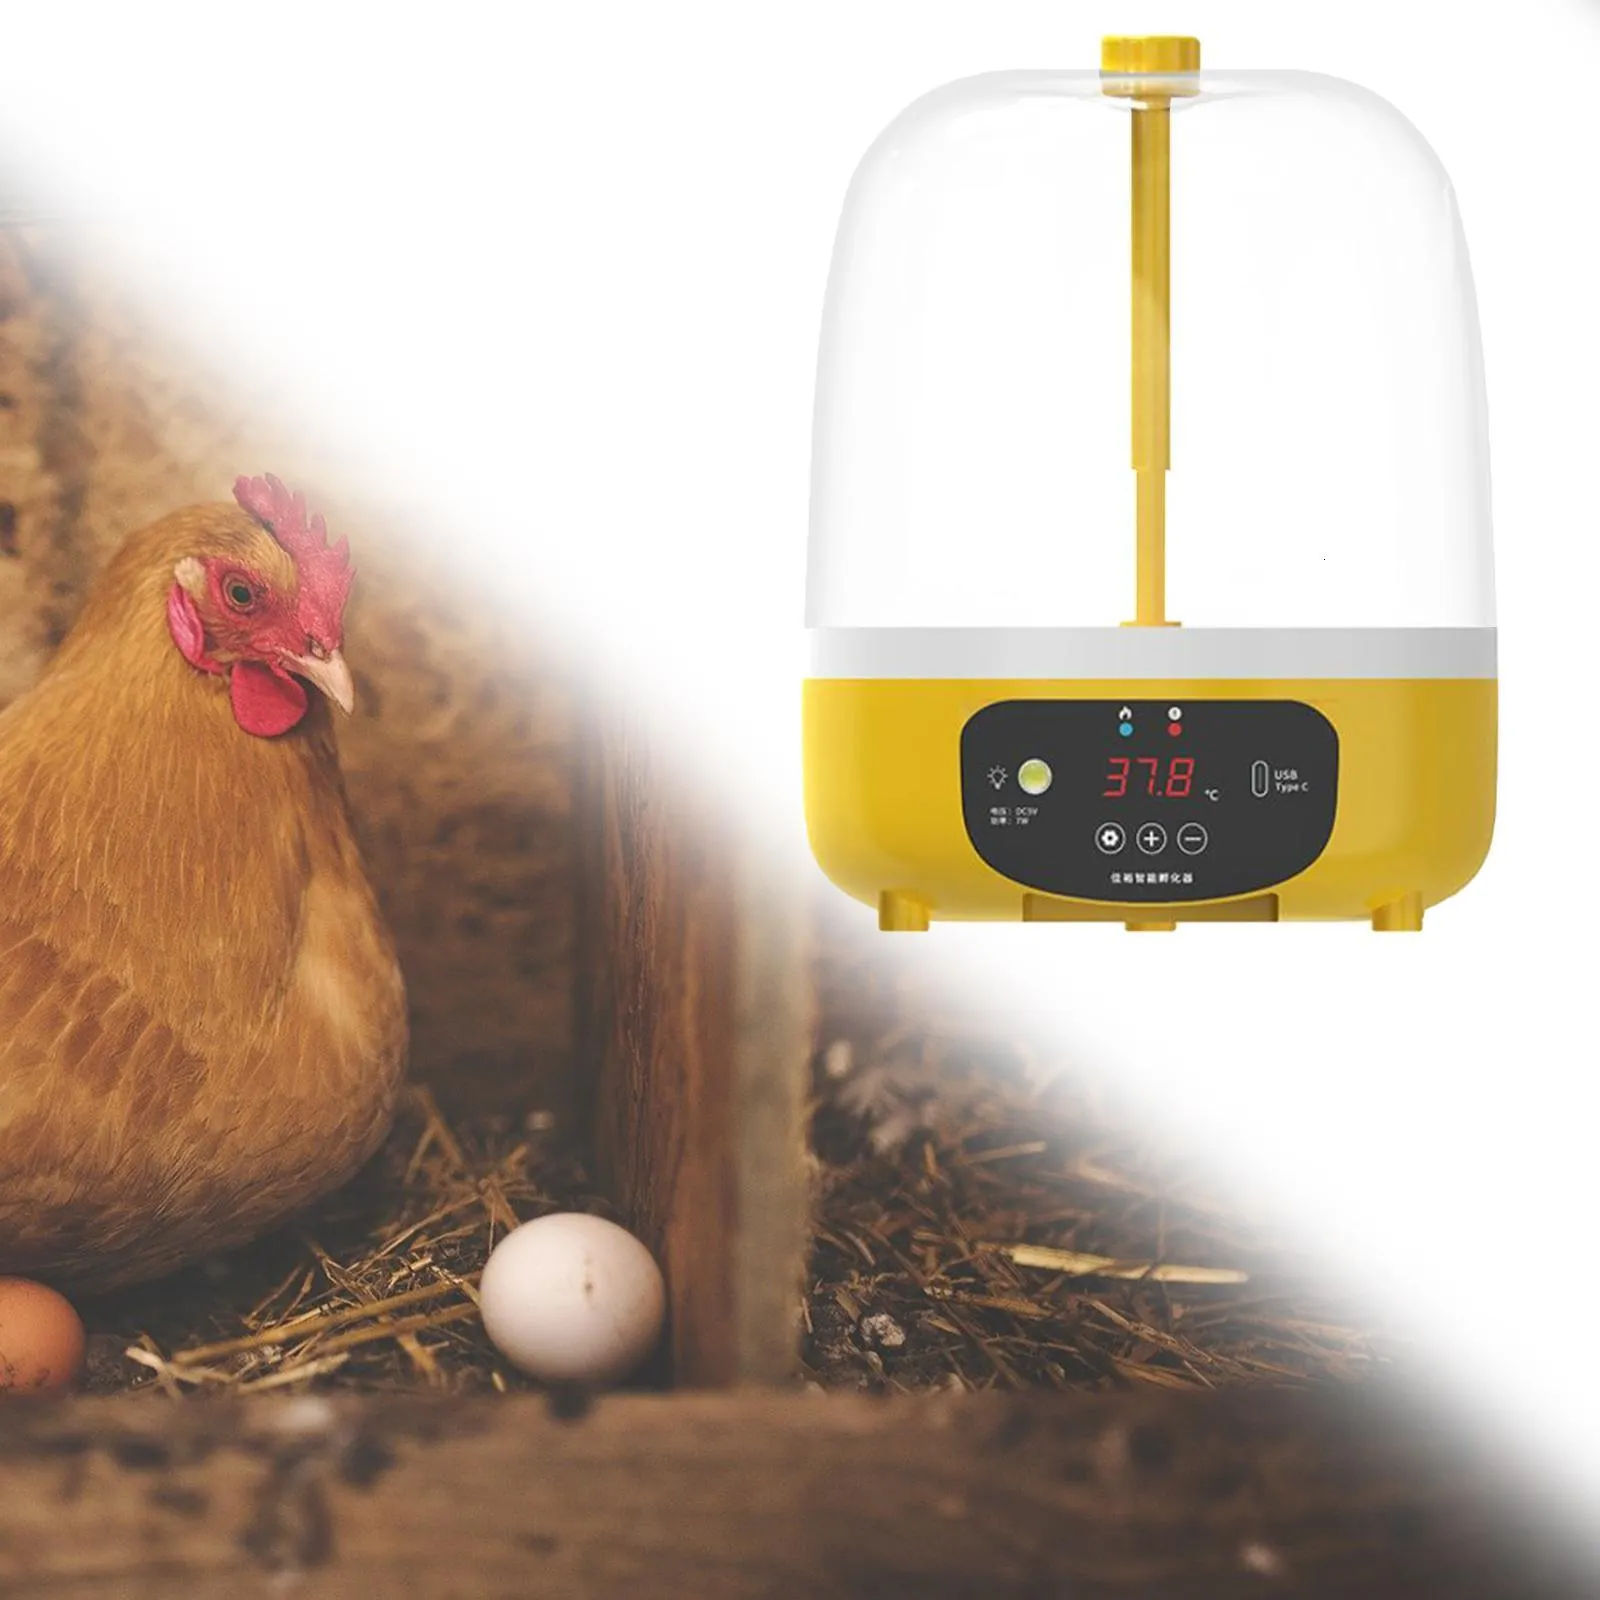 Mini Digital Automatic Egg Incubator 5 Eggs Auto Turner Temperature Control Poultry Hatcher Machine for Hatching Chicken Goose